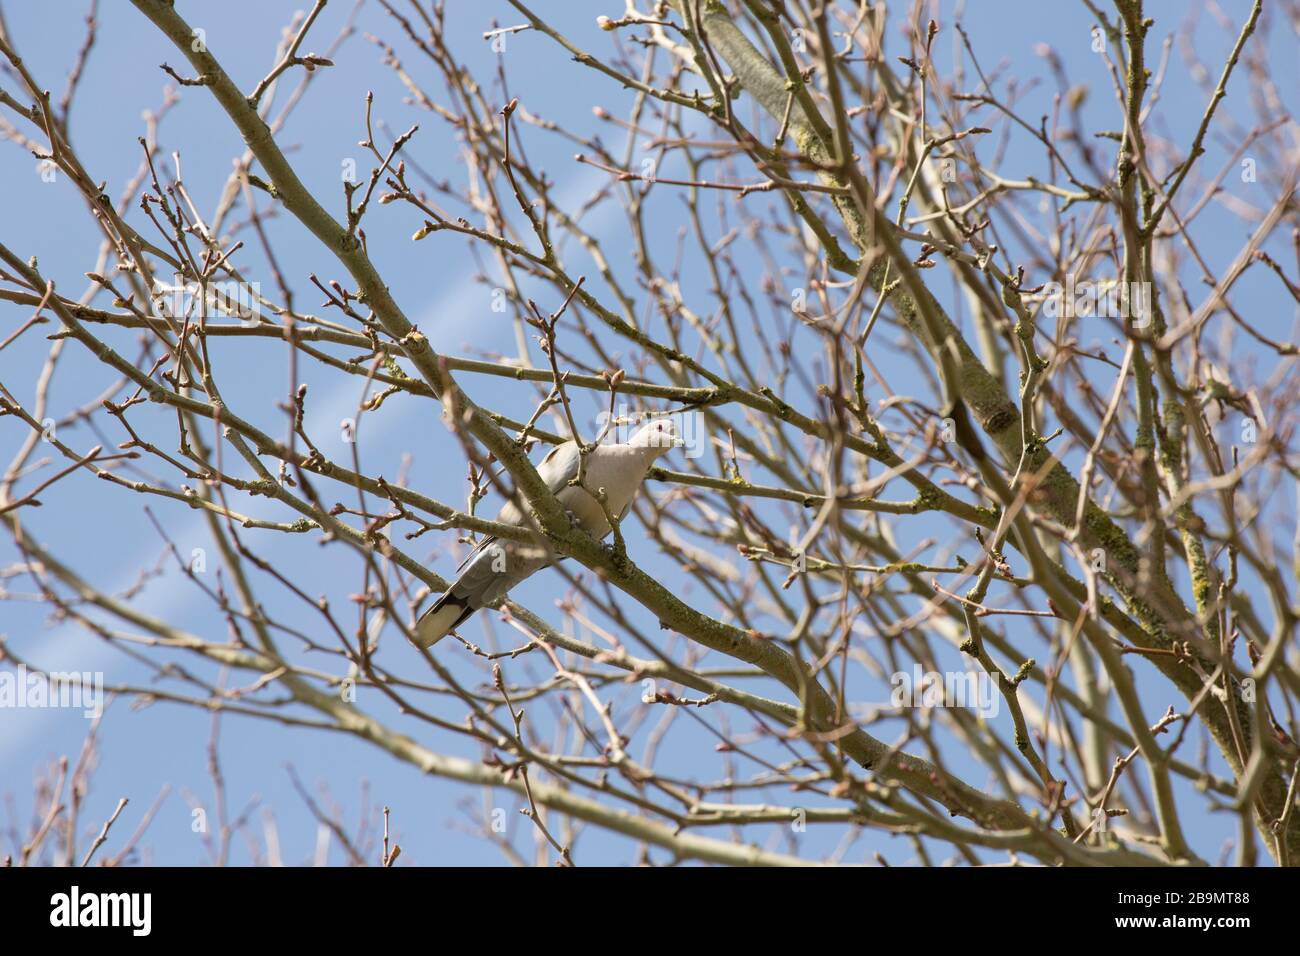 A Eurasian collared dove, Streptopelia decaocto, perched in an Ash tree, Fraxinus excelsior, in march. Gillingham North Dorset England UK GB Stock Photo